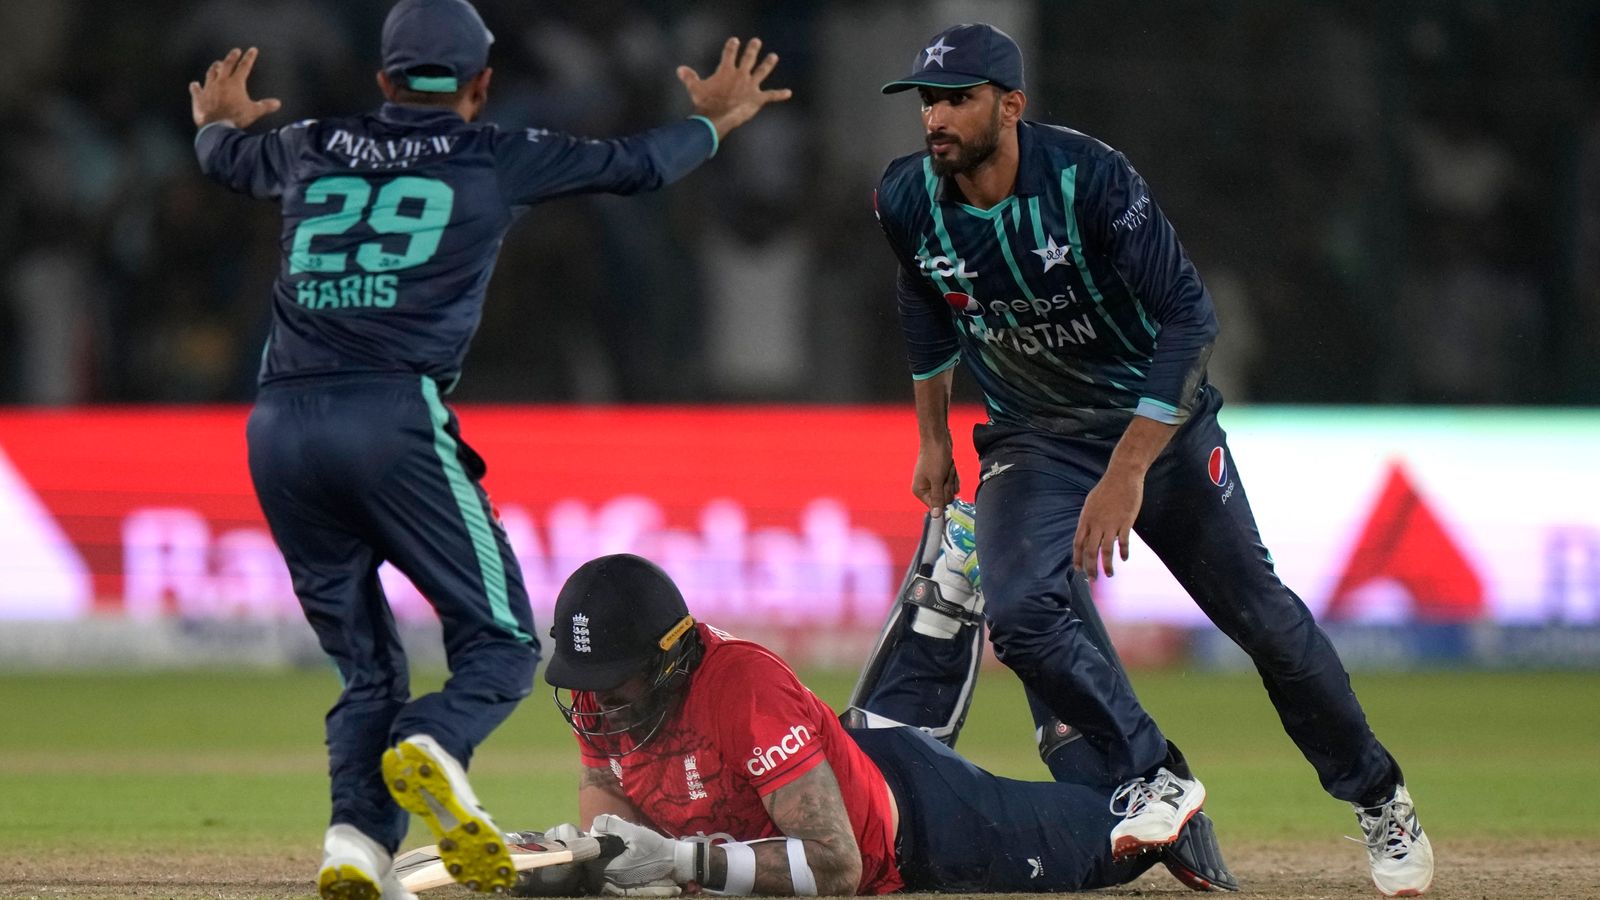 Pakistan vs England: Hosts triumph in thrilling finale to fourth T20I after Mohammad Rizwan’s 88 set up victory